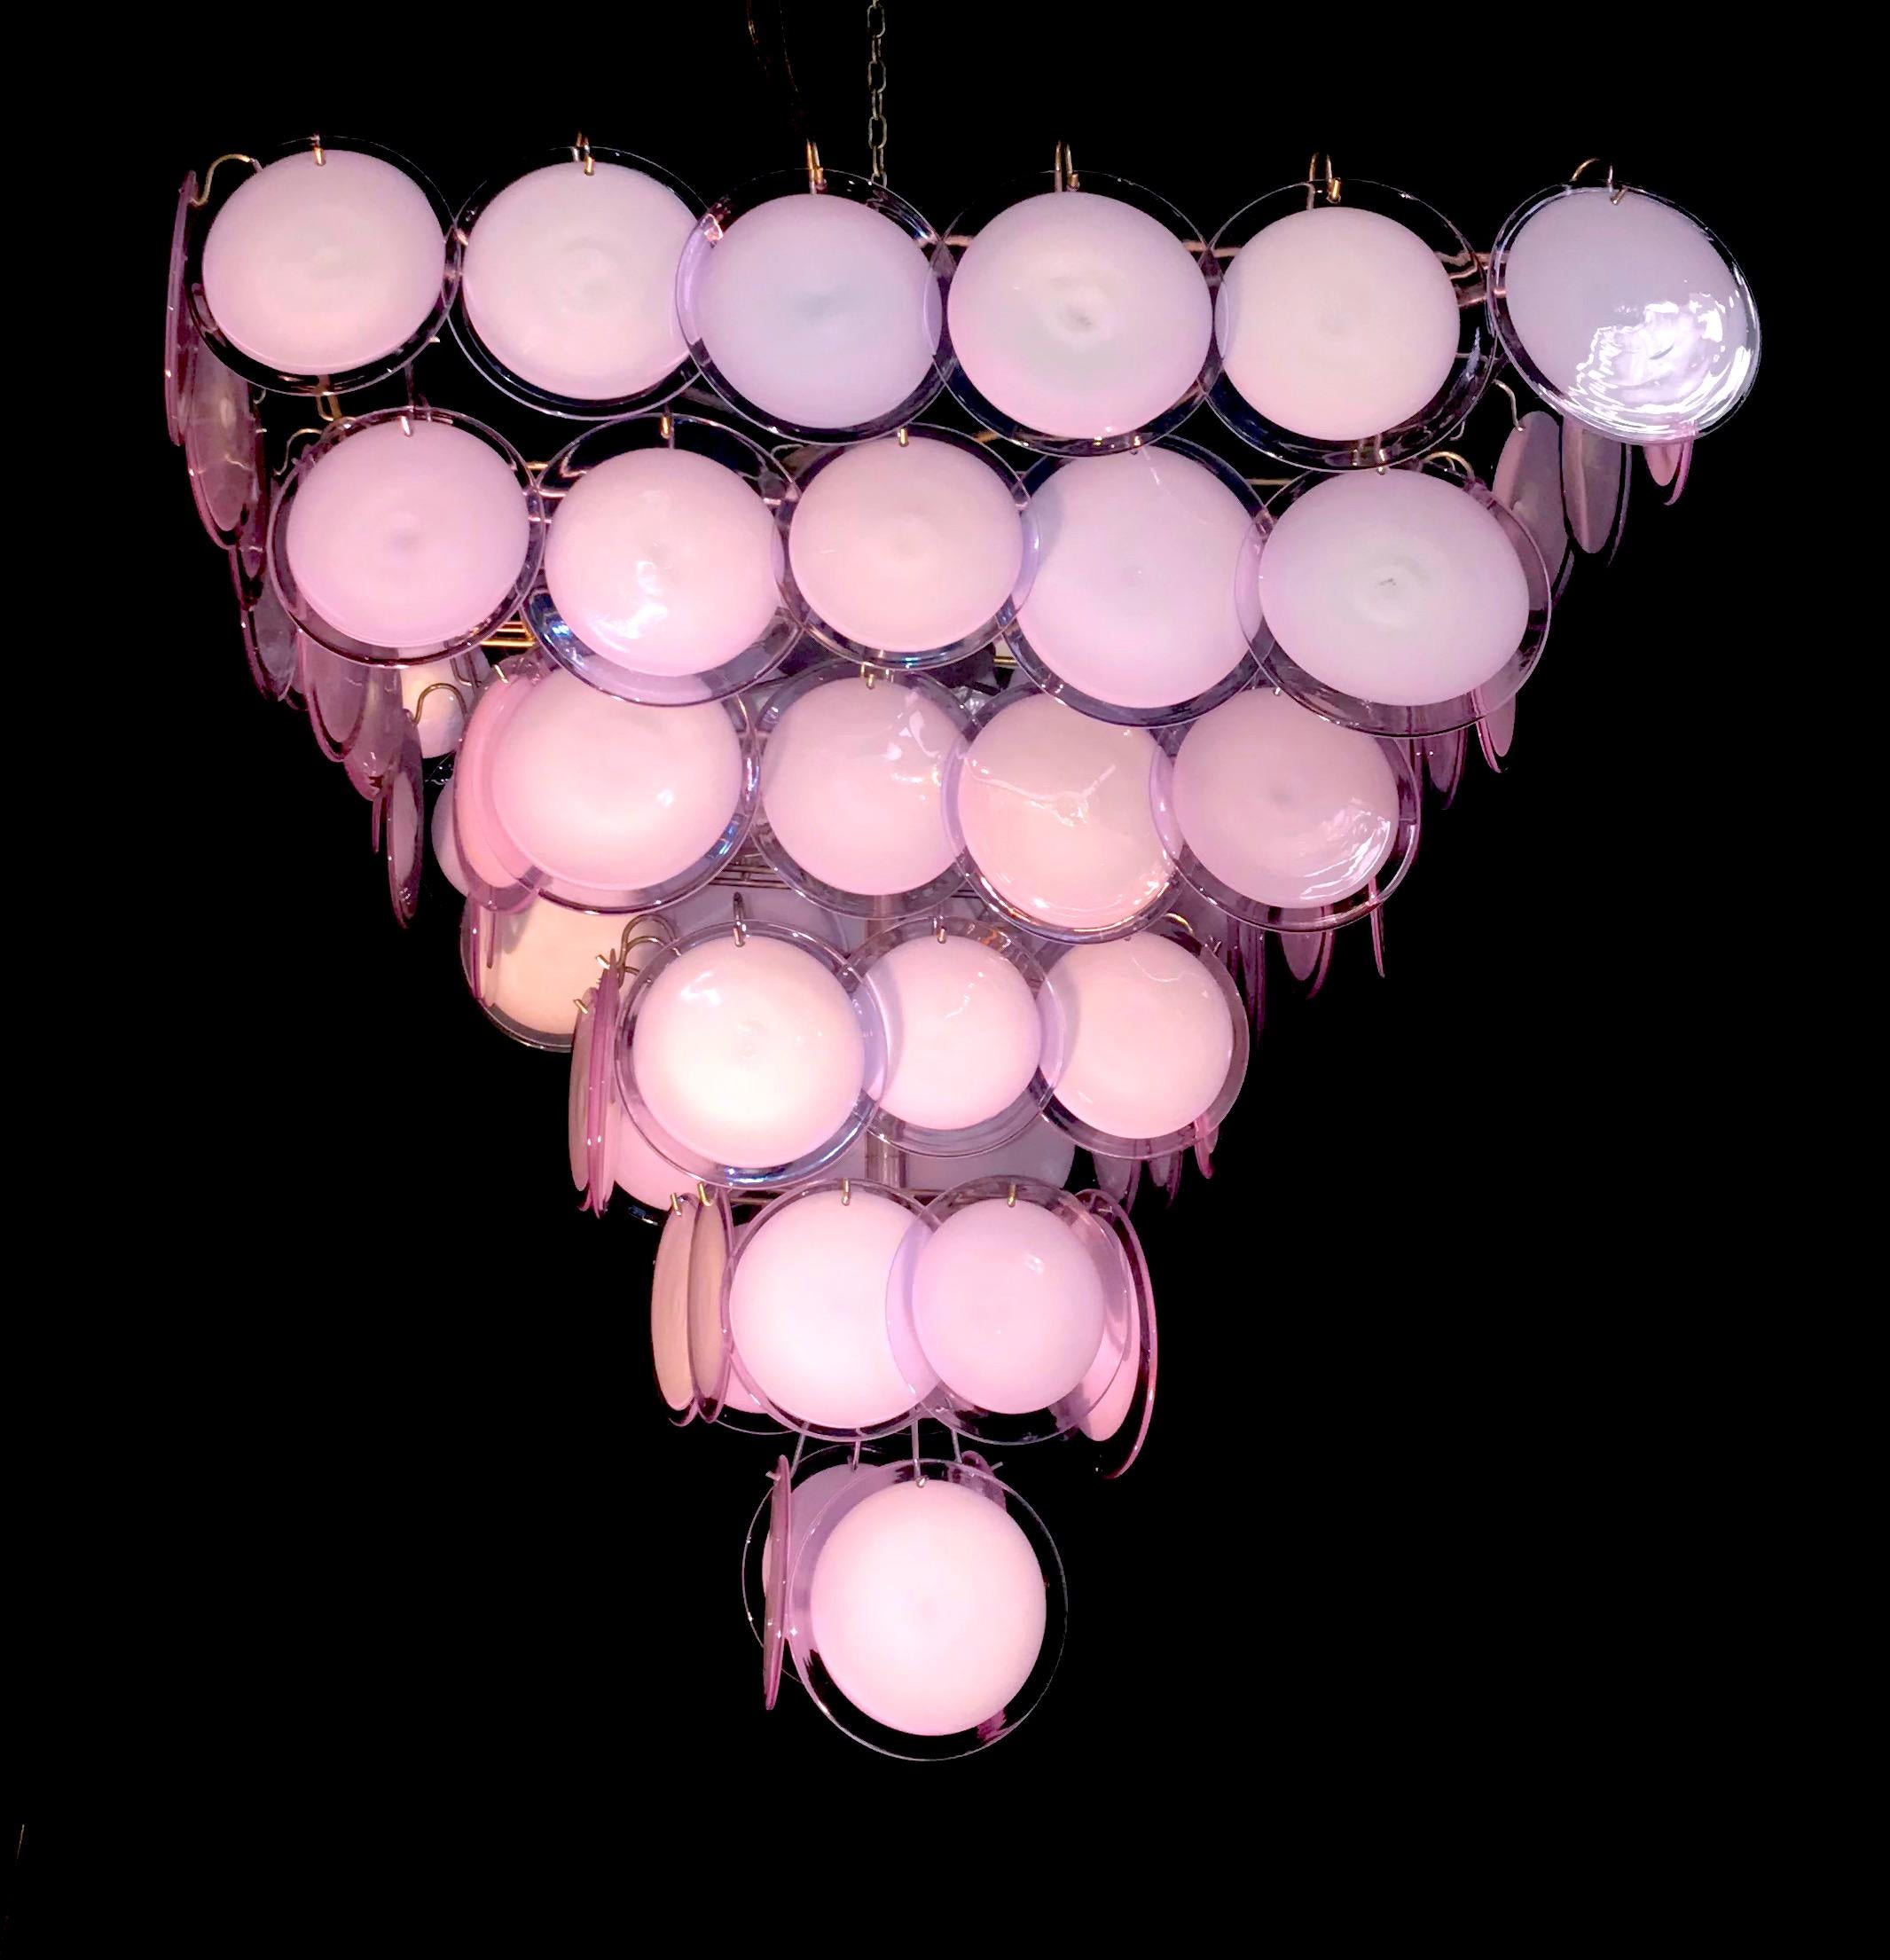 Blown Glass Fabulous Chandelier Amethyst or Pink Murano Glass Discs by Gino Vistosi, 1970s For Sale